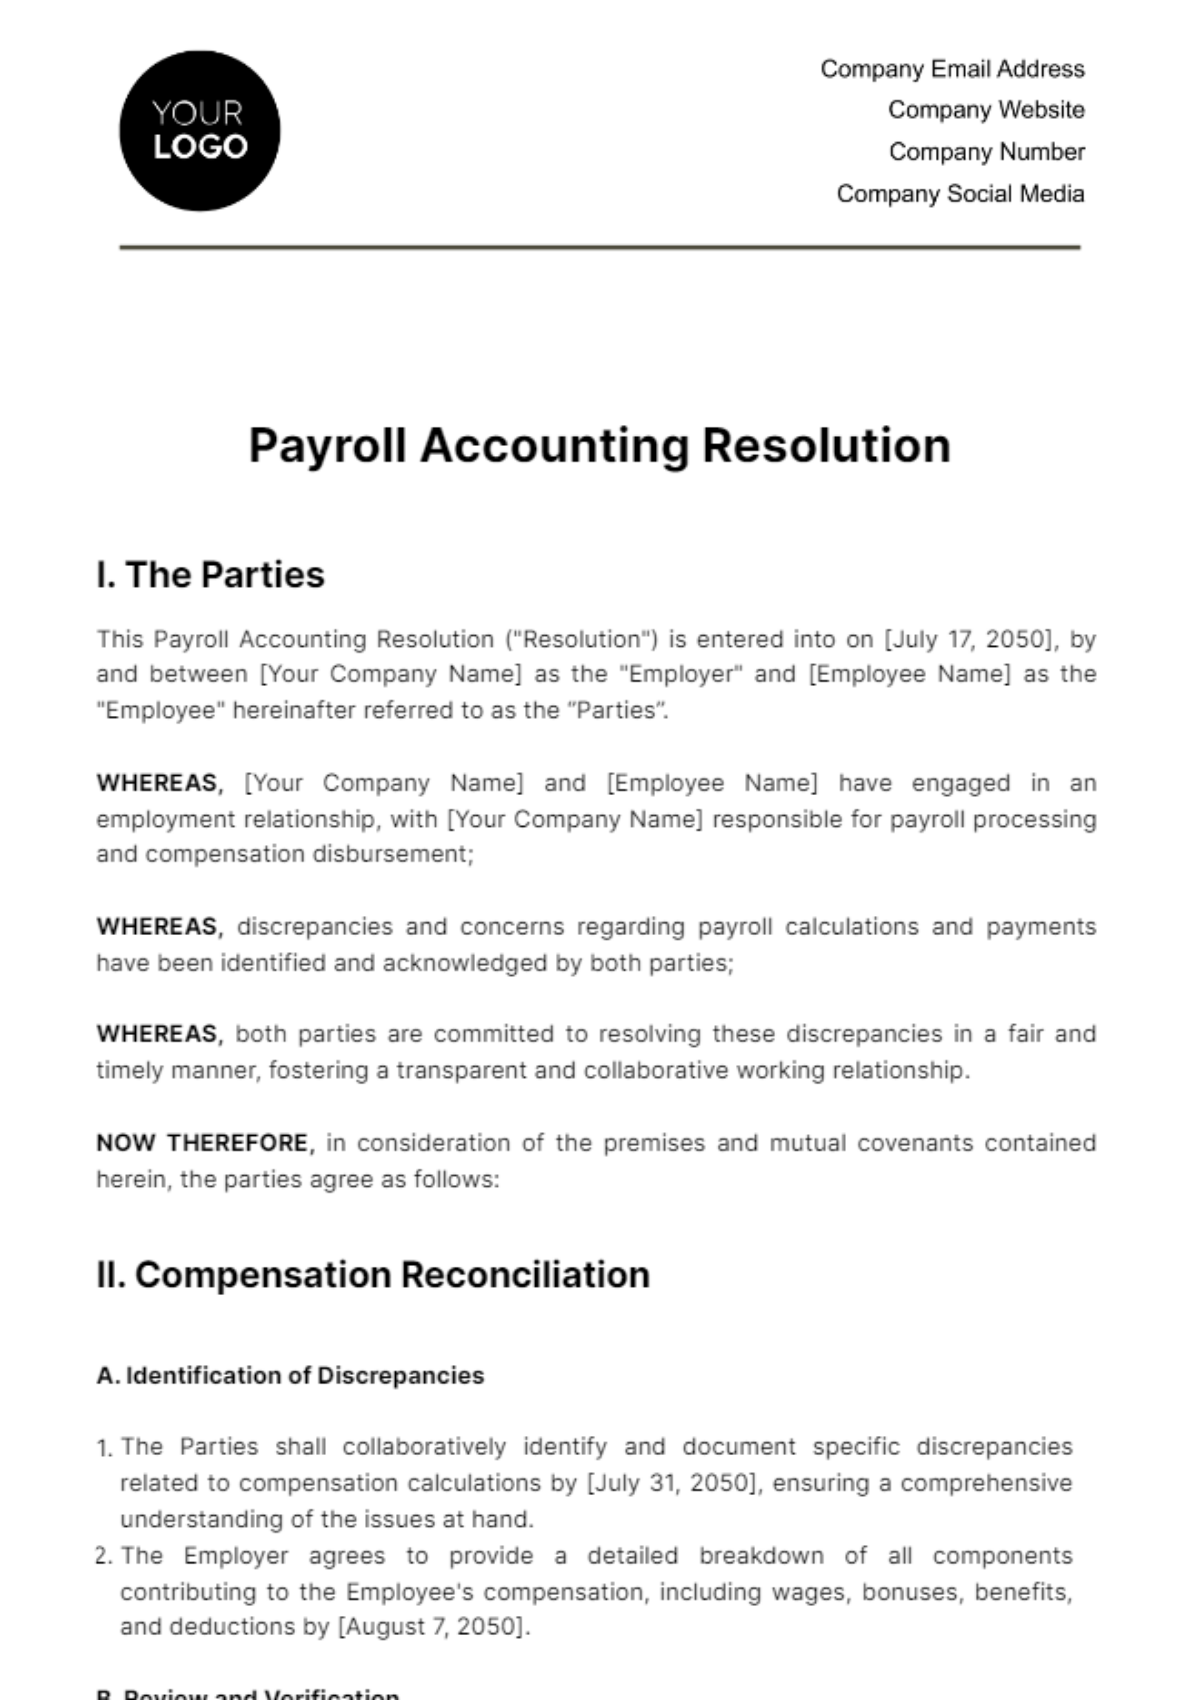 Payroll Accounting Resolution Template